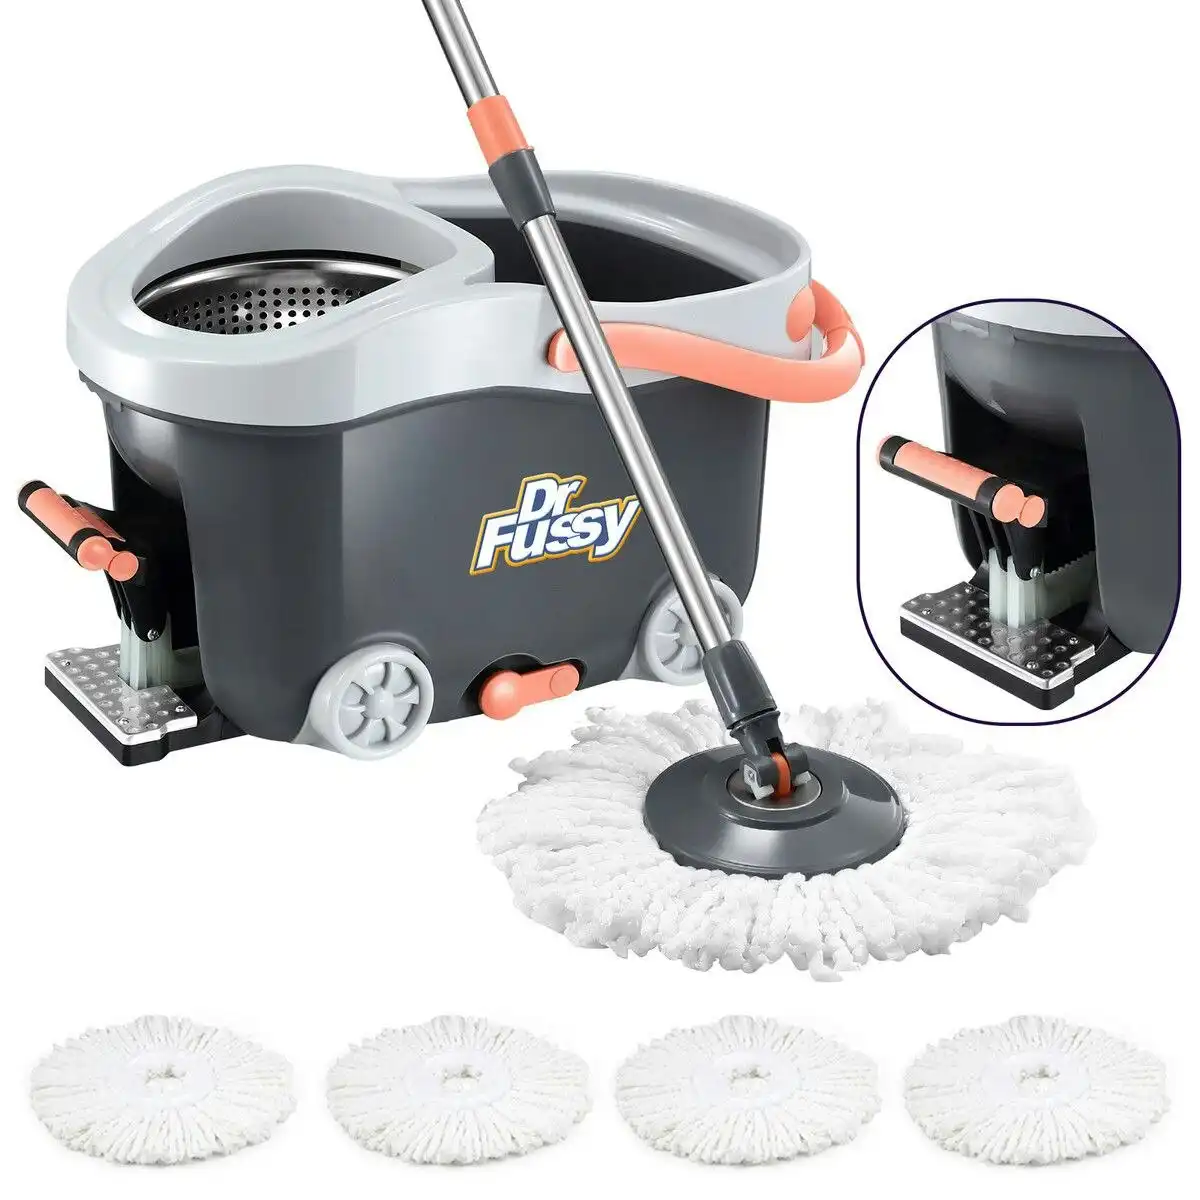 Dr FUSSY Spin Mop and Bucket Set Floor Cleaner Dust Magic Dry Twist Cleaning System 4 Microfibre Heads for Wood Tile Hardwood